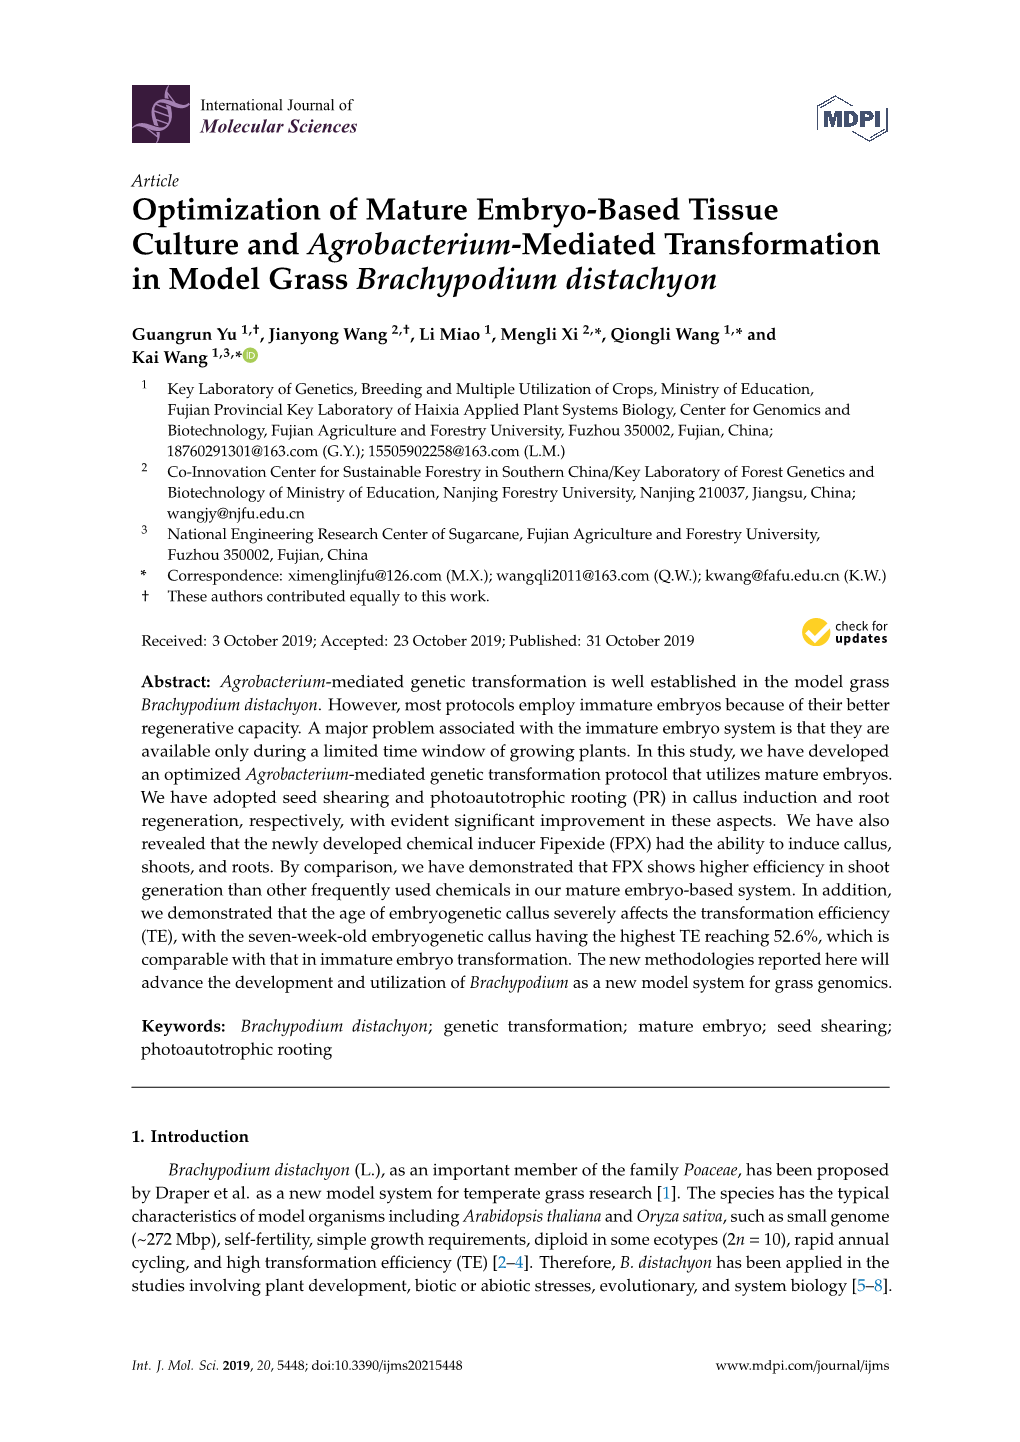 Optimization of Mature Embryo-Based Tissue Culture and Agrobacterium-Mediated Transformation in Model Grass Brachypodium Distachyon